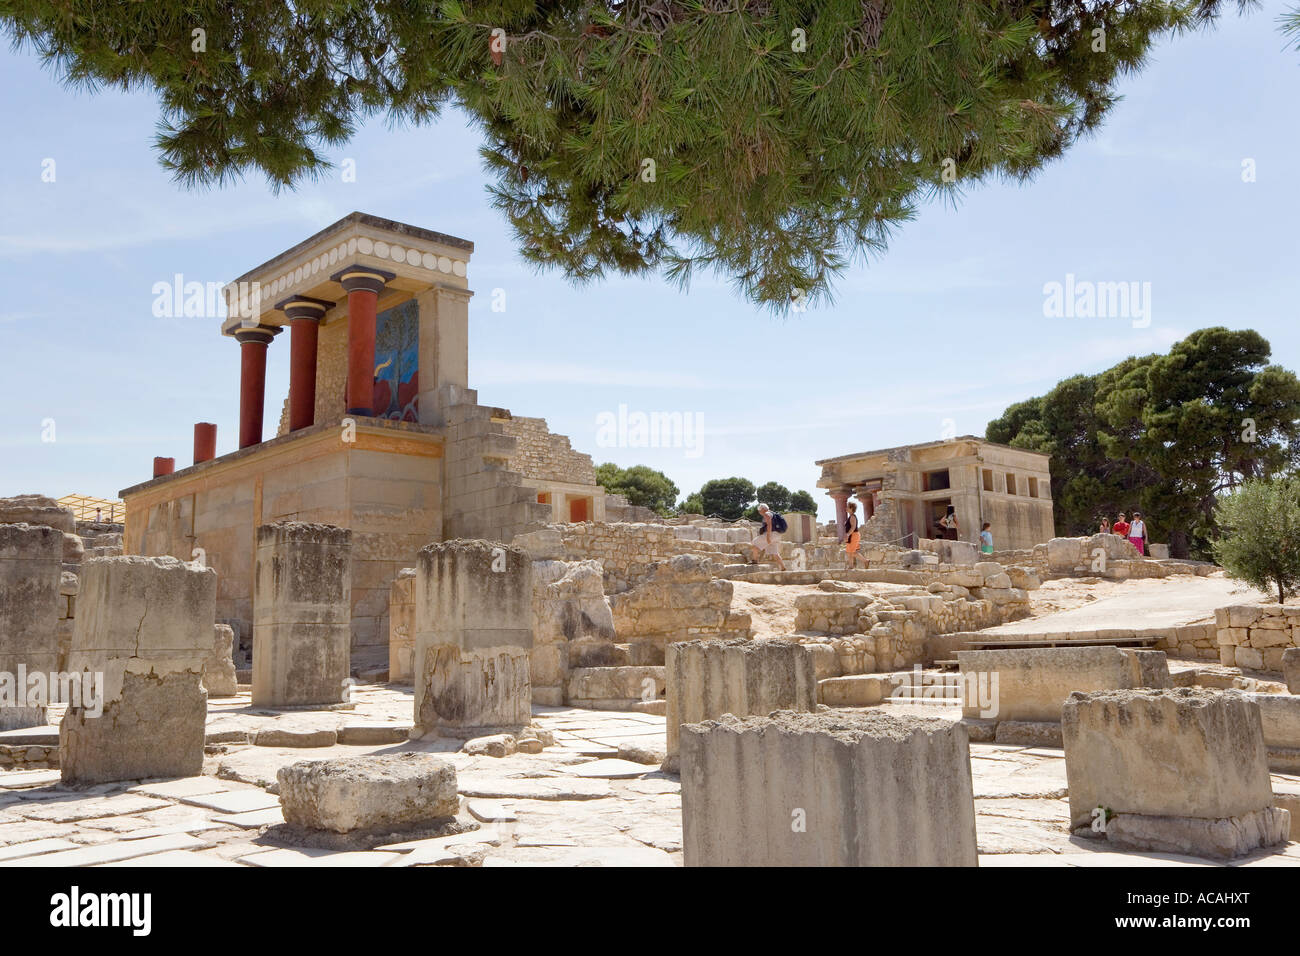 Ruins of the palace of Knossos, Crete, Greece Stock Photo